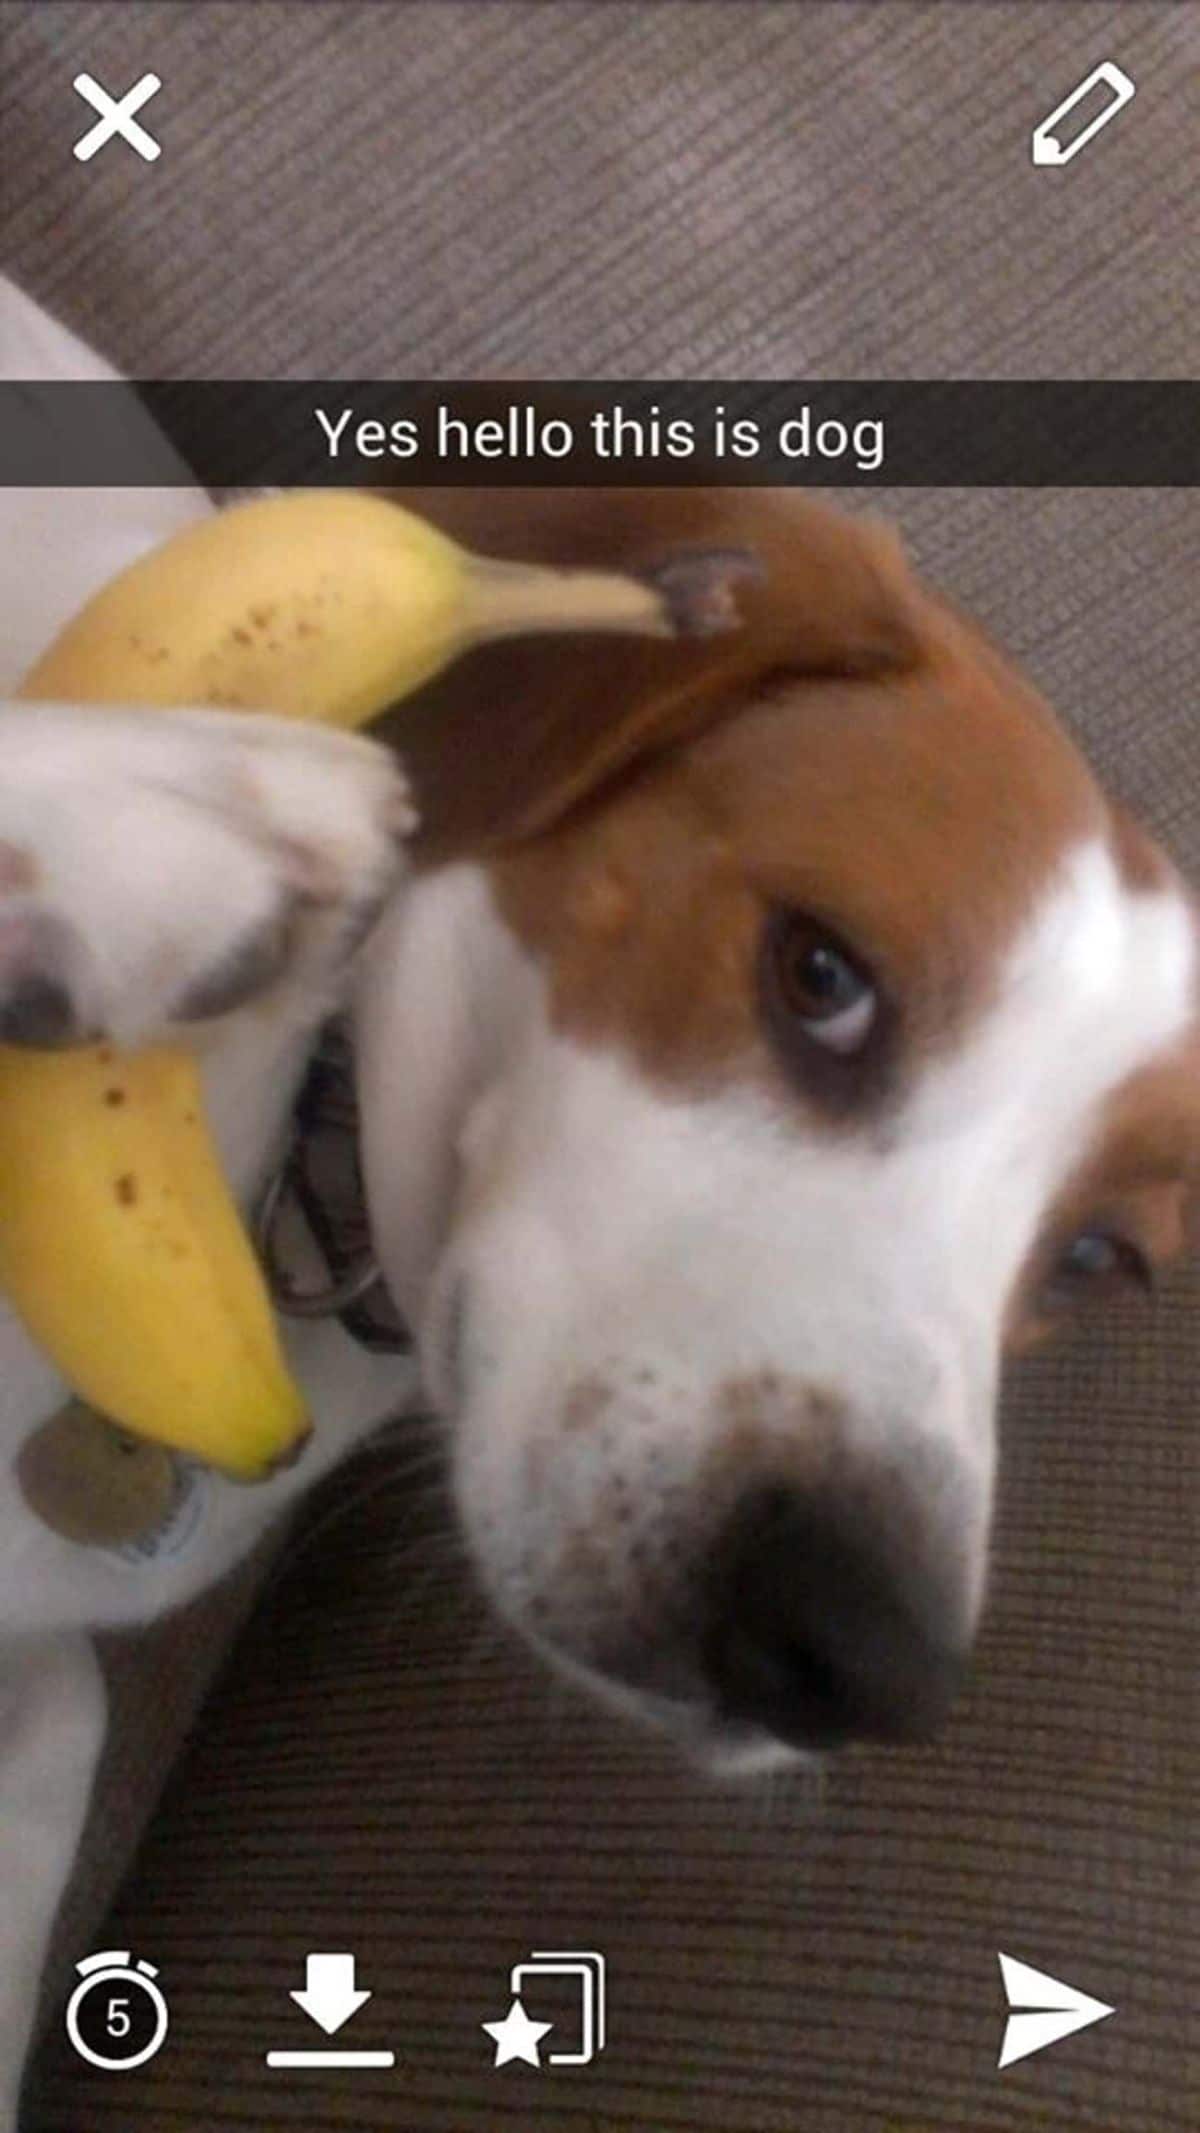 brown and white dog laying down holding a banana to its right ear with the caption Yes hello this is dog